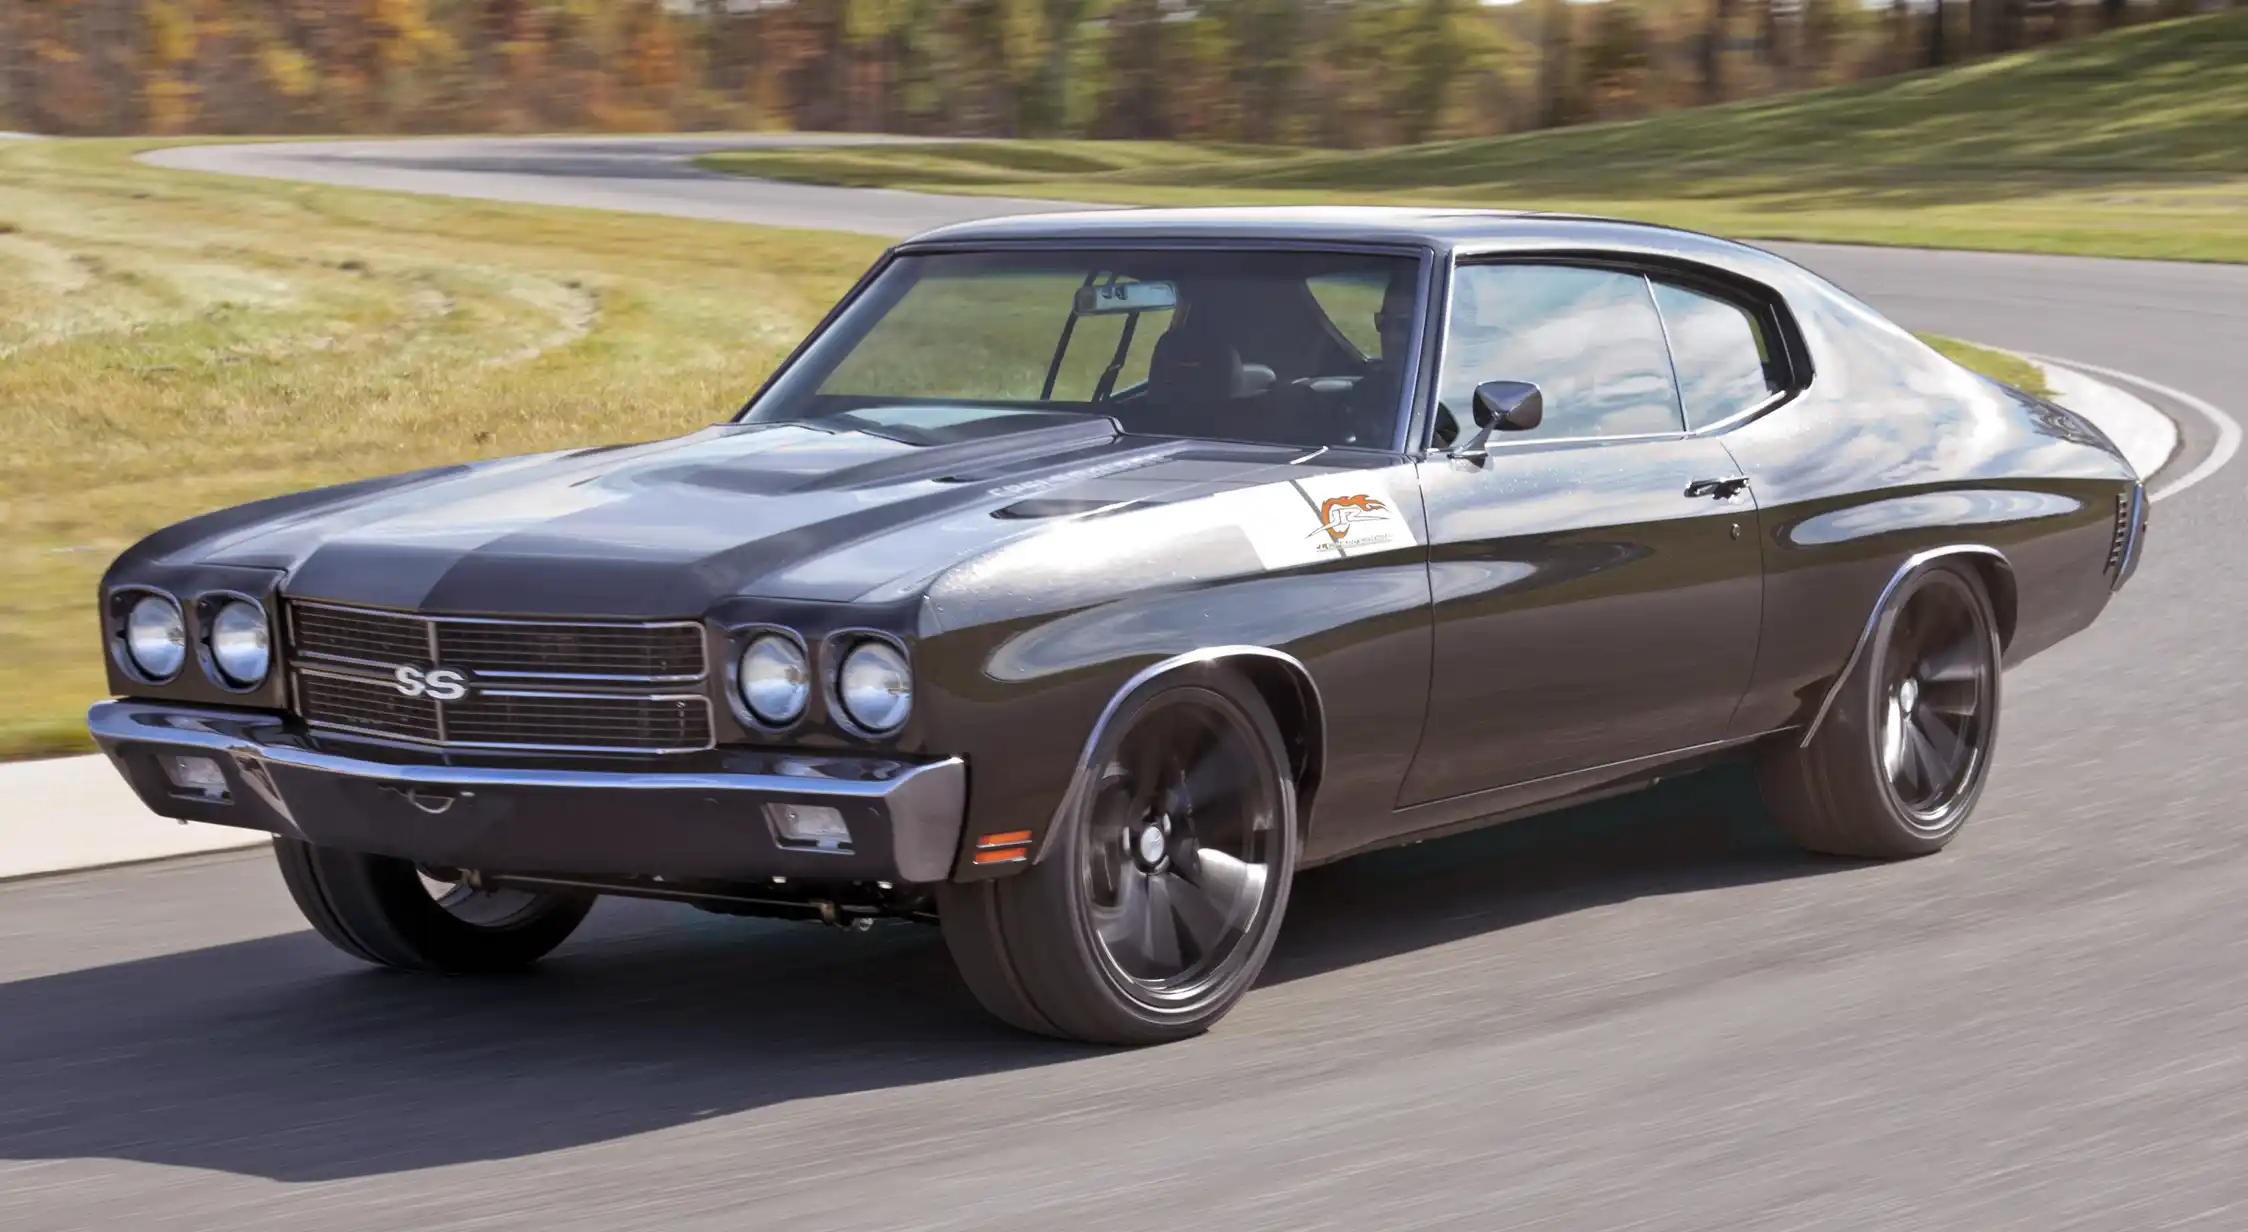 Chevrolet Chevelle – The Supreme Muscle Car Ever